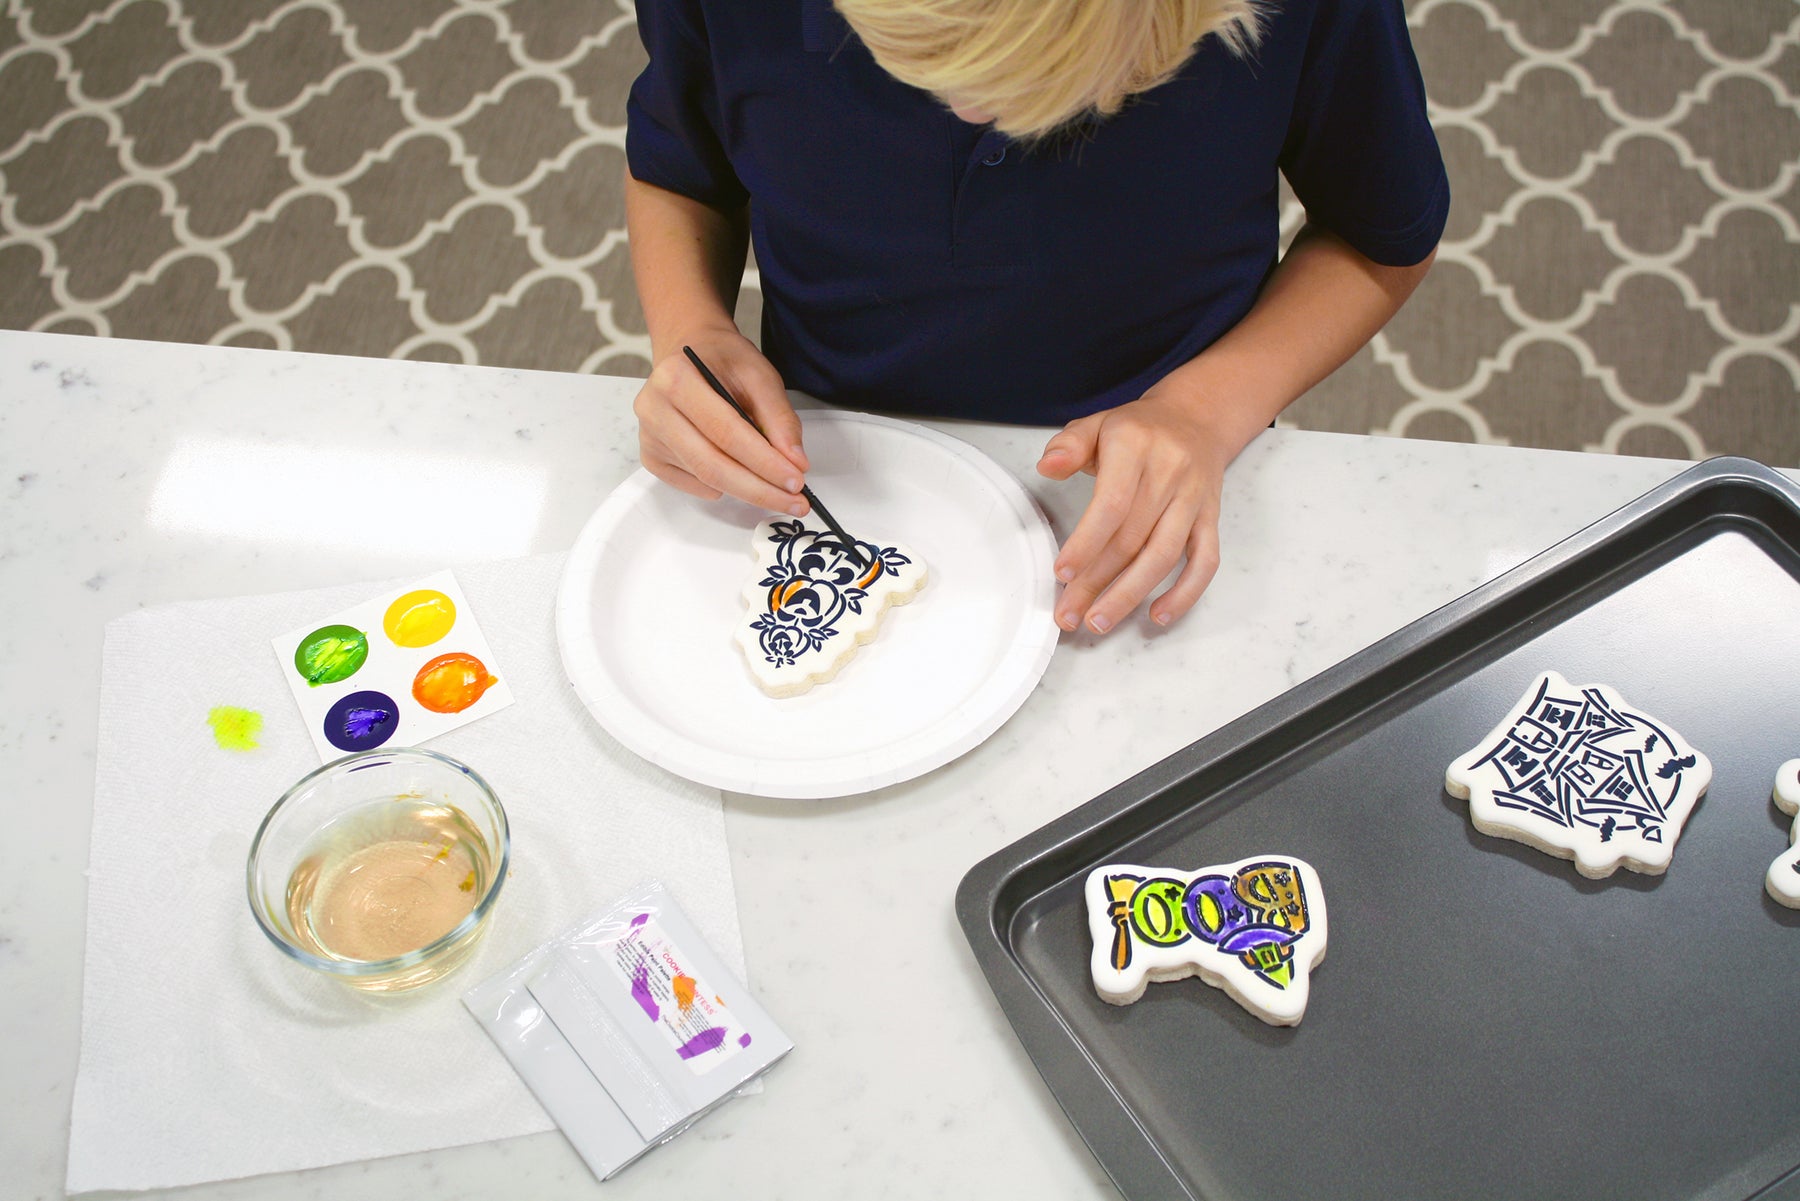 Making and Decorating PYO (Paint Your Own) Cookies